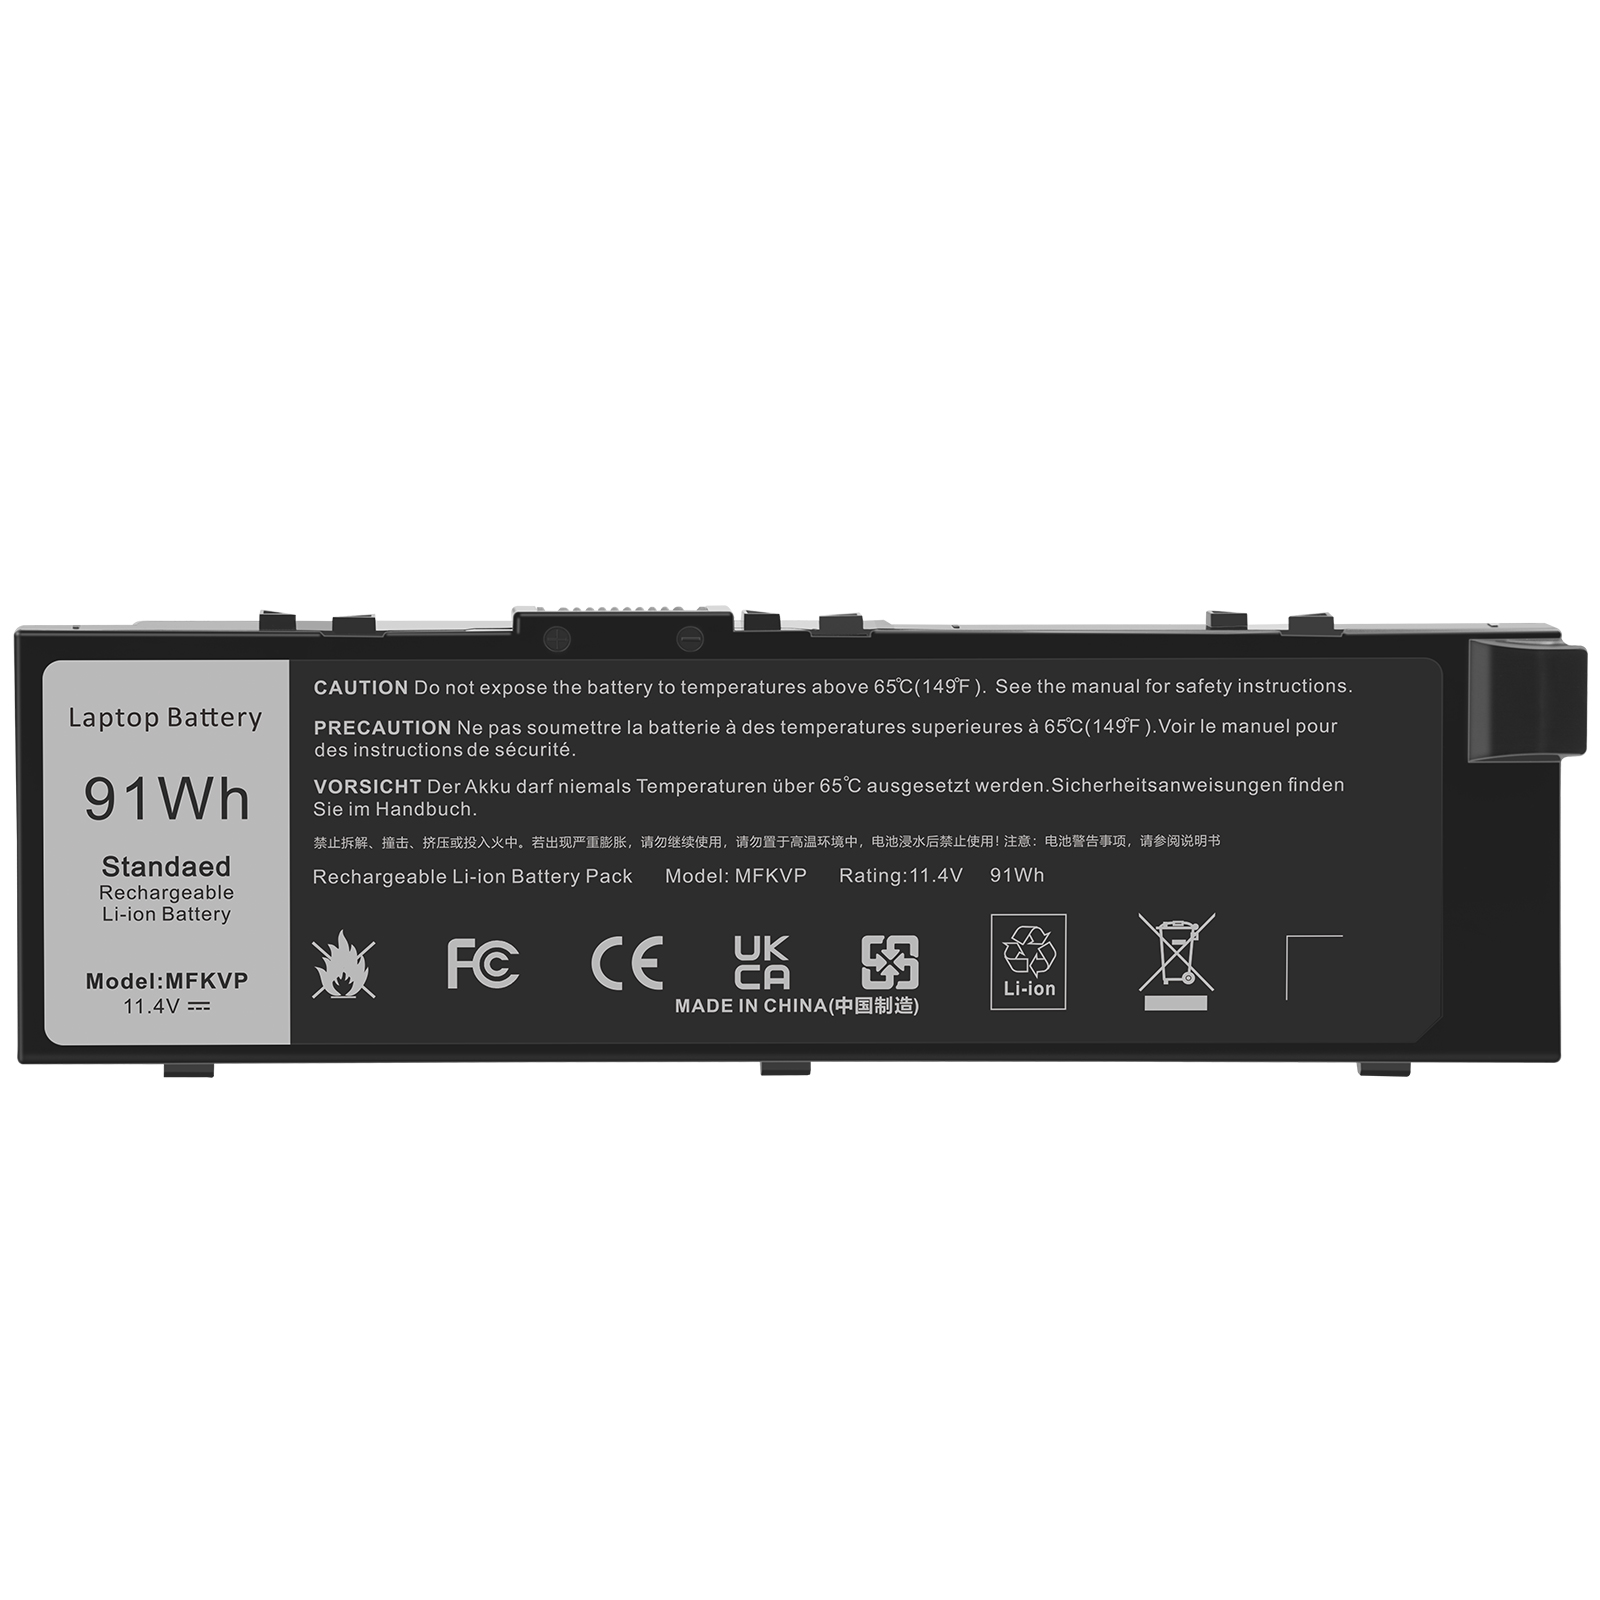 91Wh MFKVP Battery T05W1 for Dell Precision 15 7510 7520;17 7710 7720;M7510 M7710 GR5D3 M28DH 1G9VM 451-BBSB 451-BBSF - 11.4V 91Wh 3-Cell - image 1 of 11